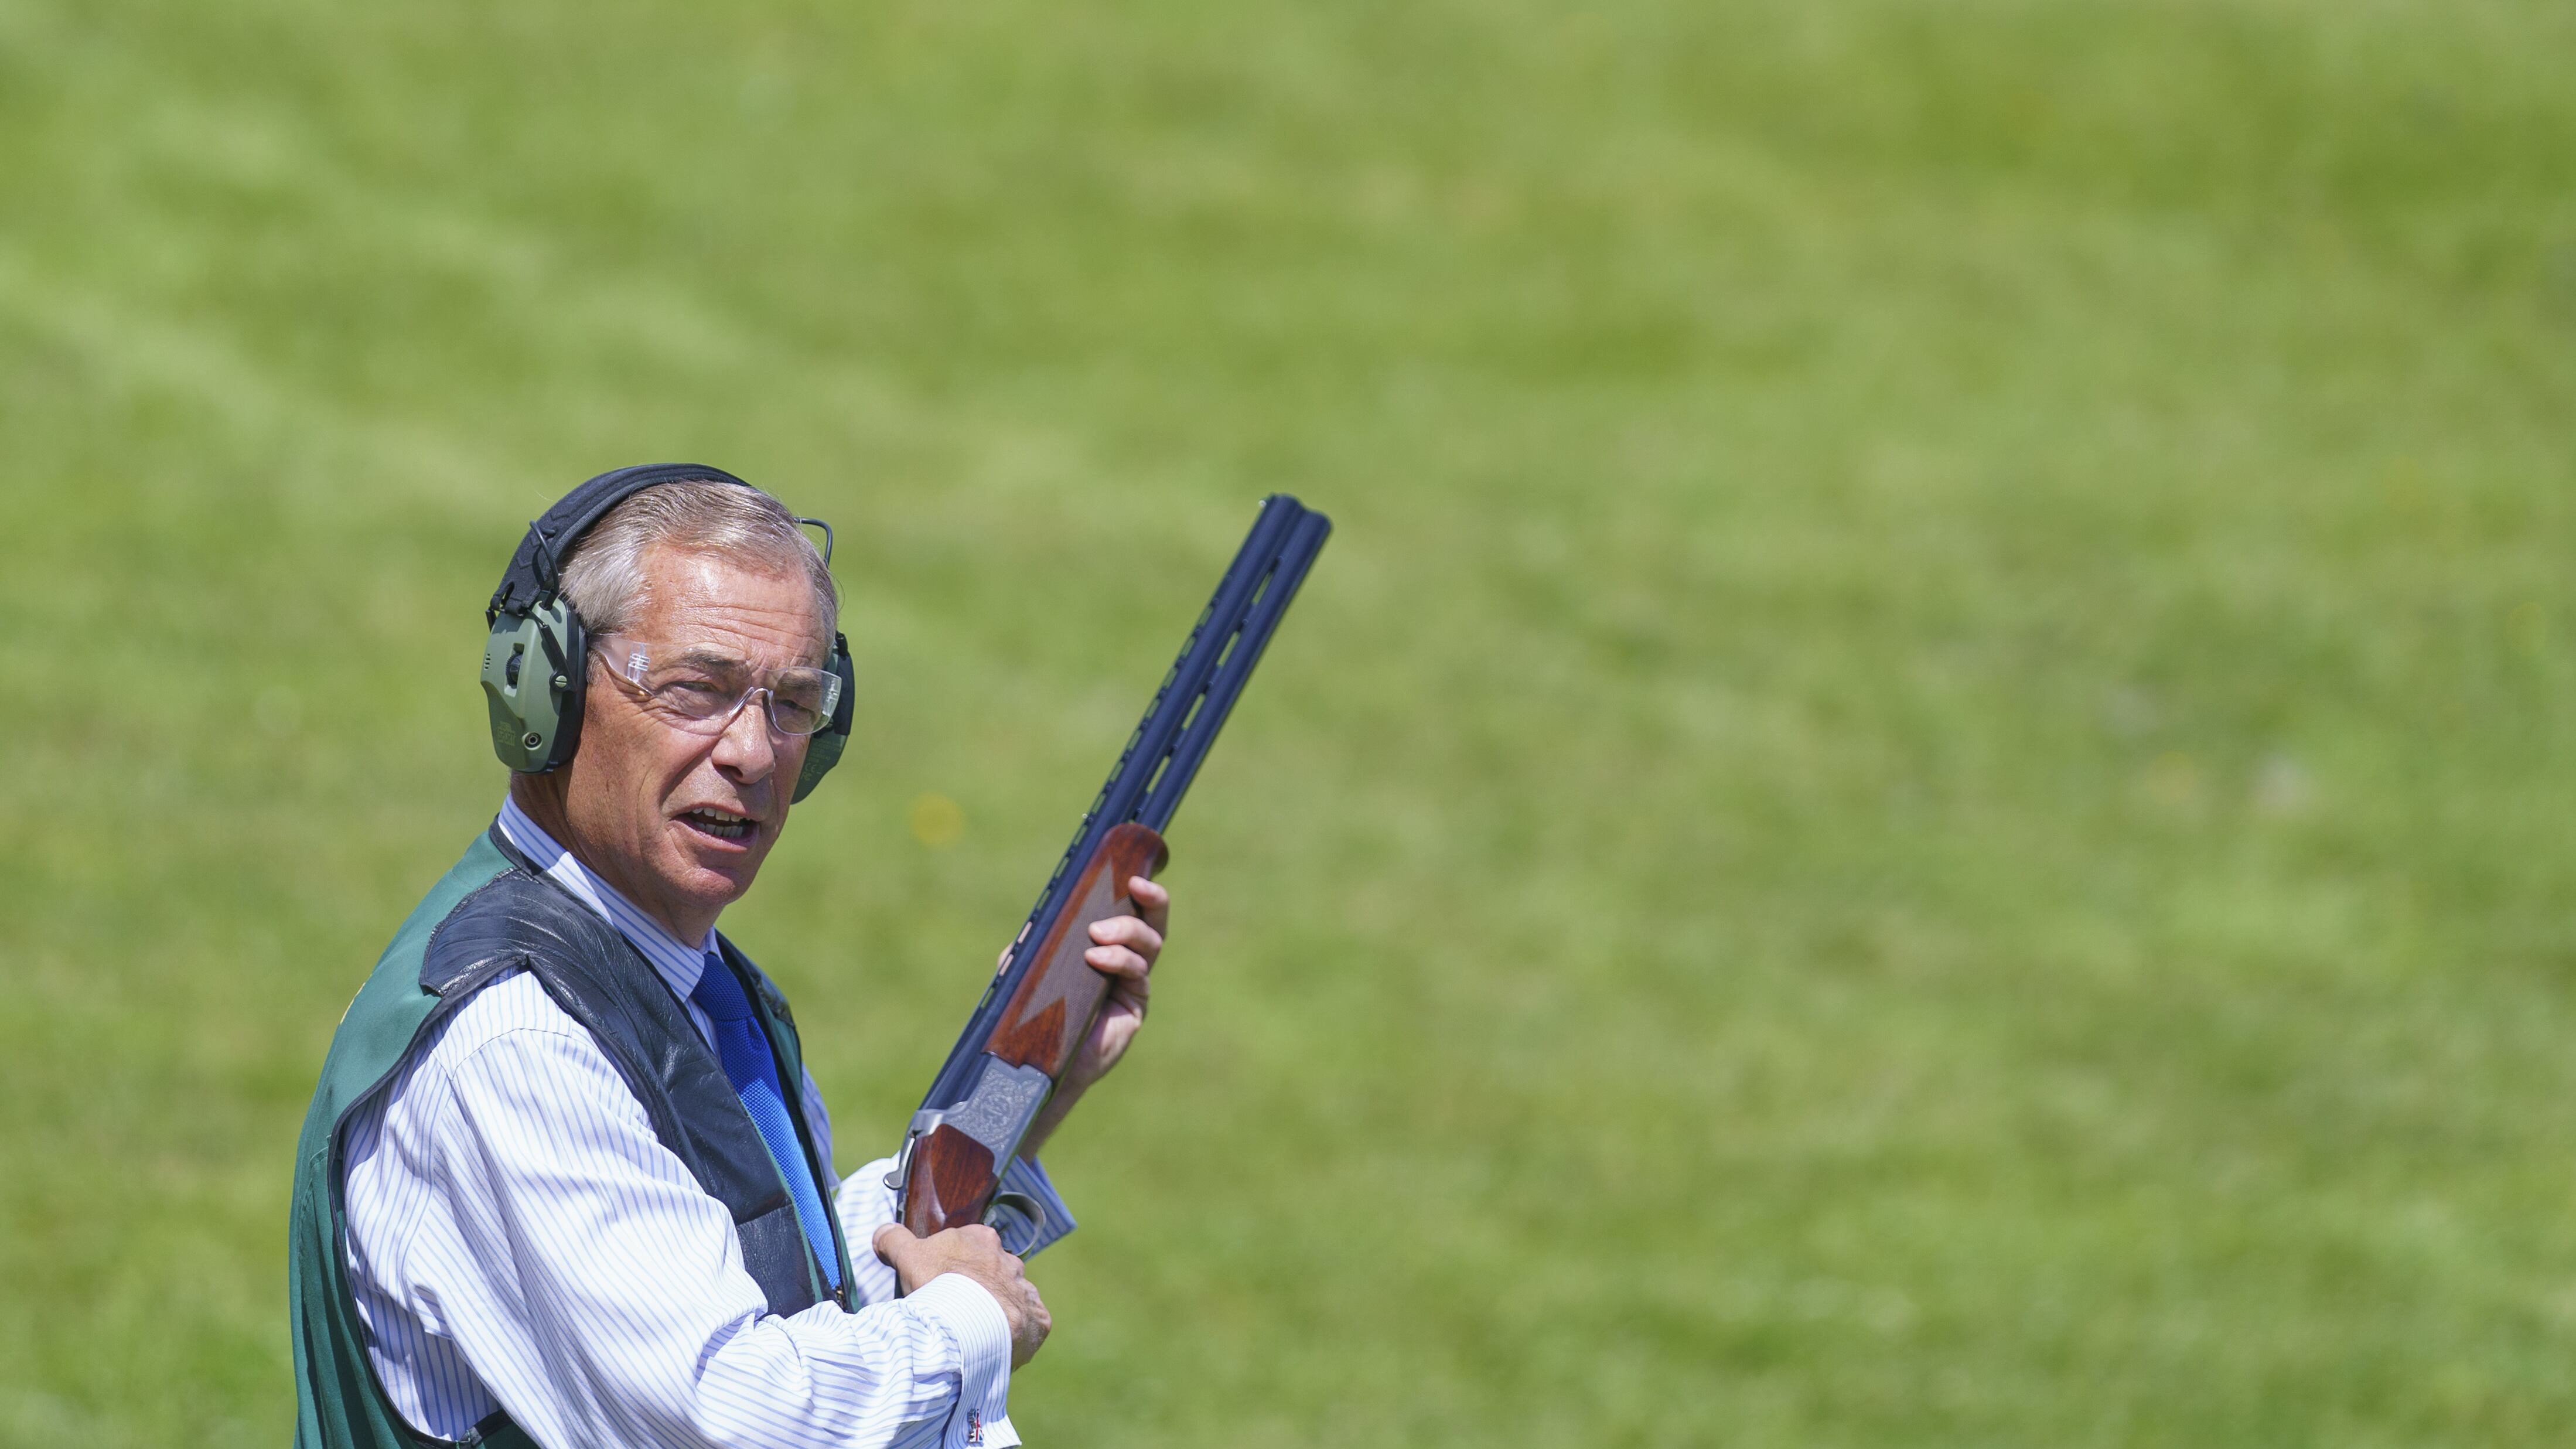 Reform UK leader Nigel Farage takes part in clay pigeon shooting during a visit to Catton Hall in Frodsham, Cheshire